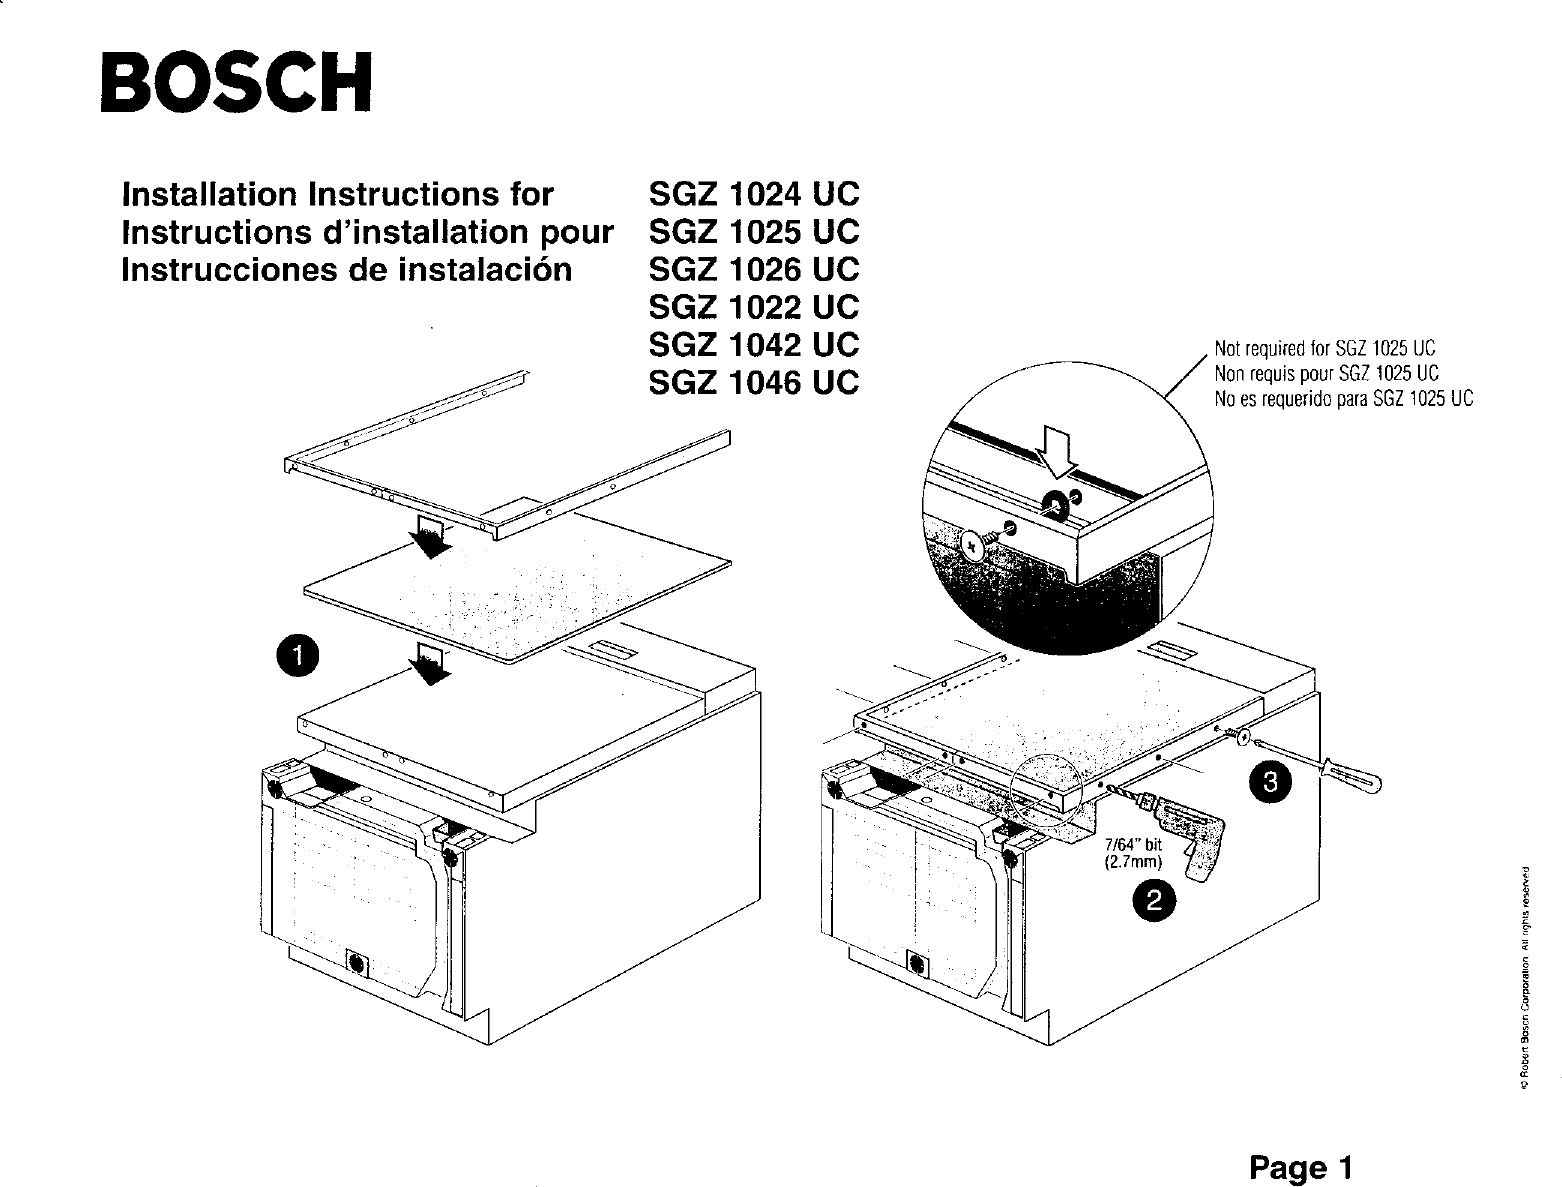 Page 1 of 4 - BOSCH  Dishwasher Manual L0020047